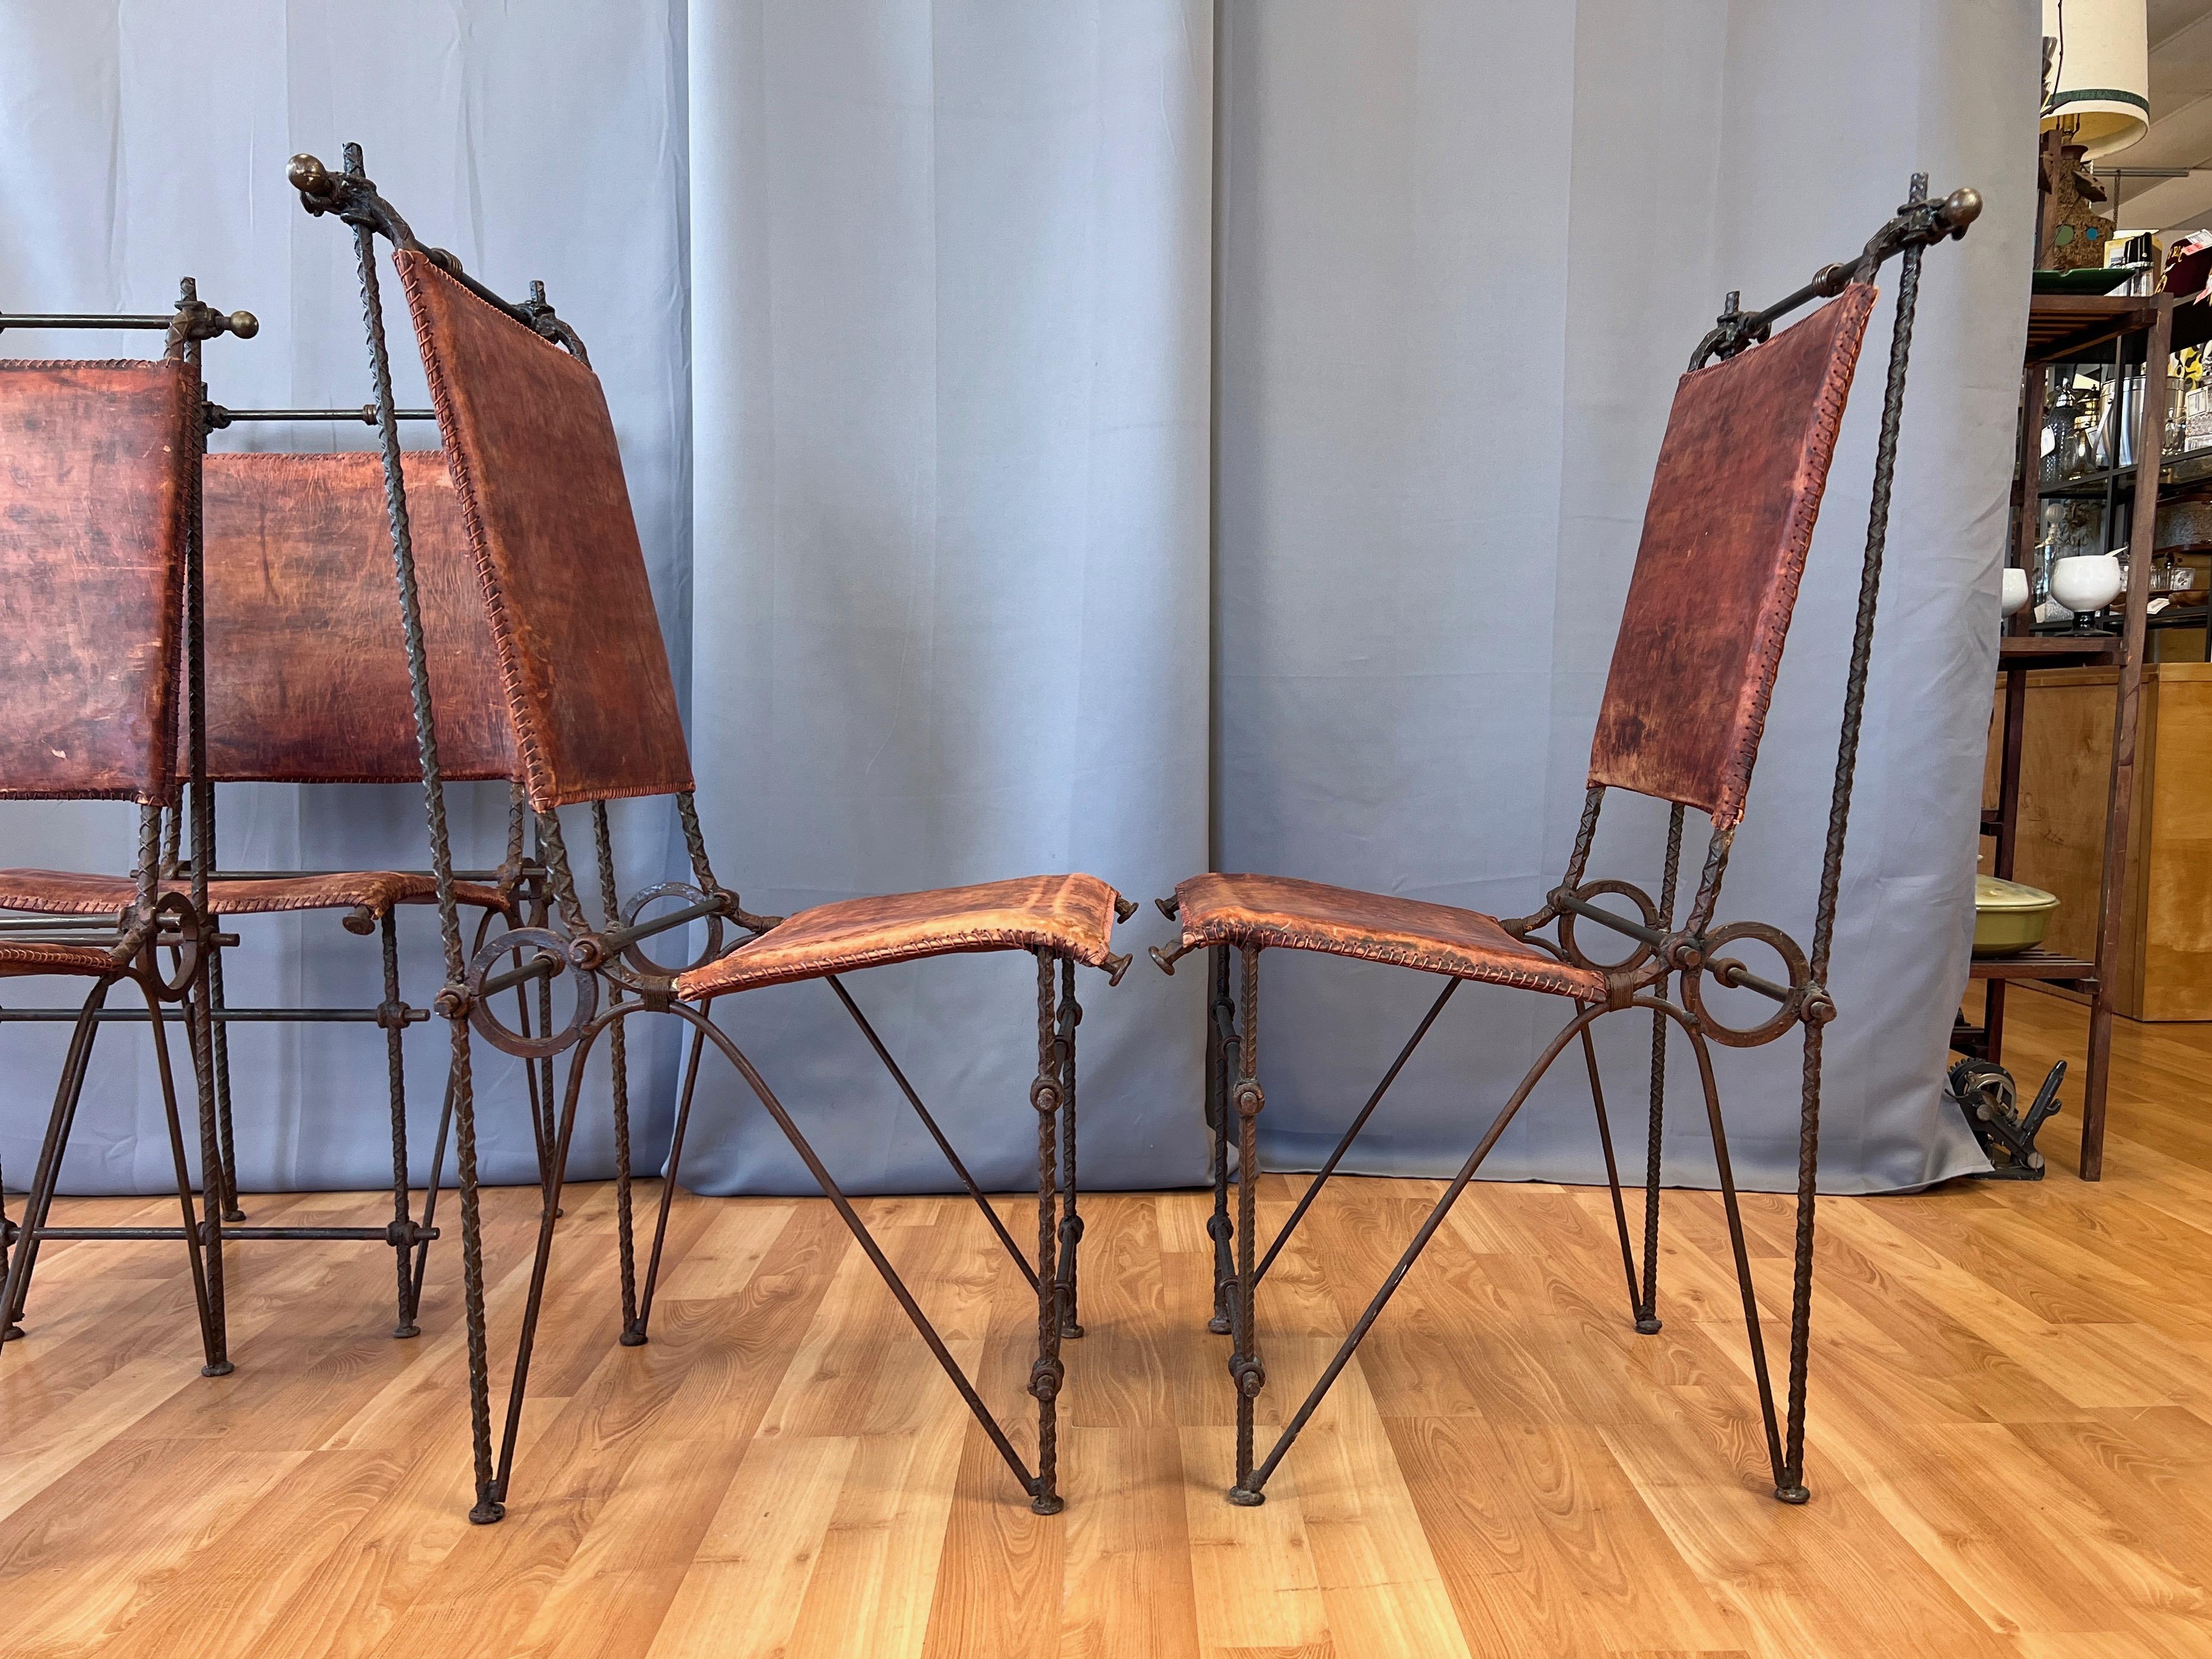 Set of 4 Ilana Goor-Attributed Brutalist Metal and Leather Dining Chairs, 1980 For Sale 6